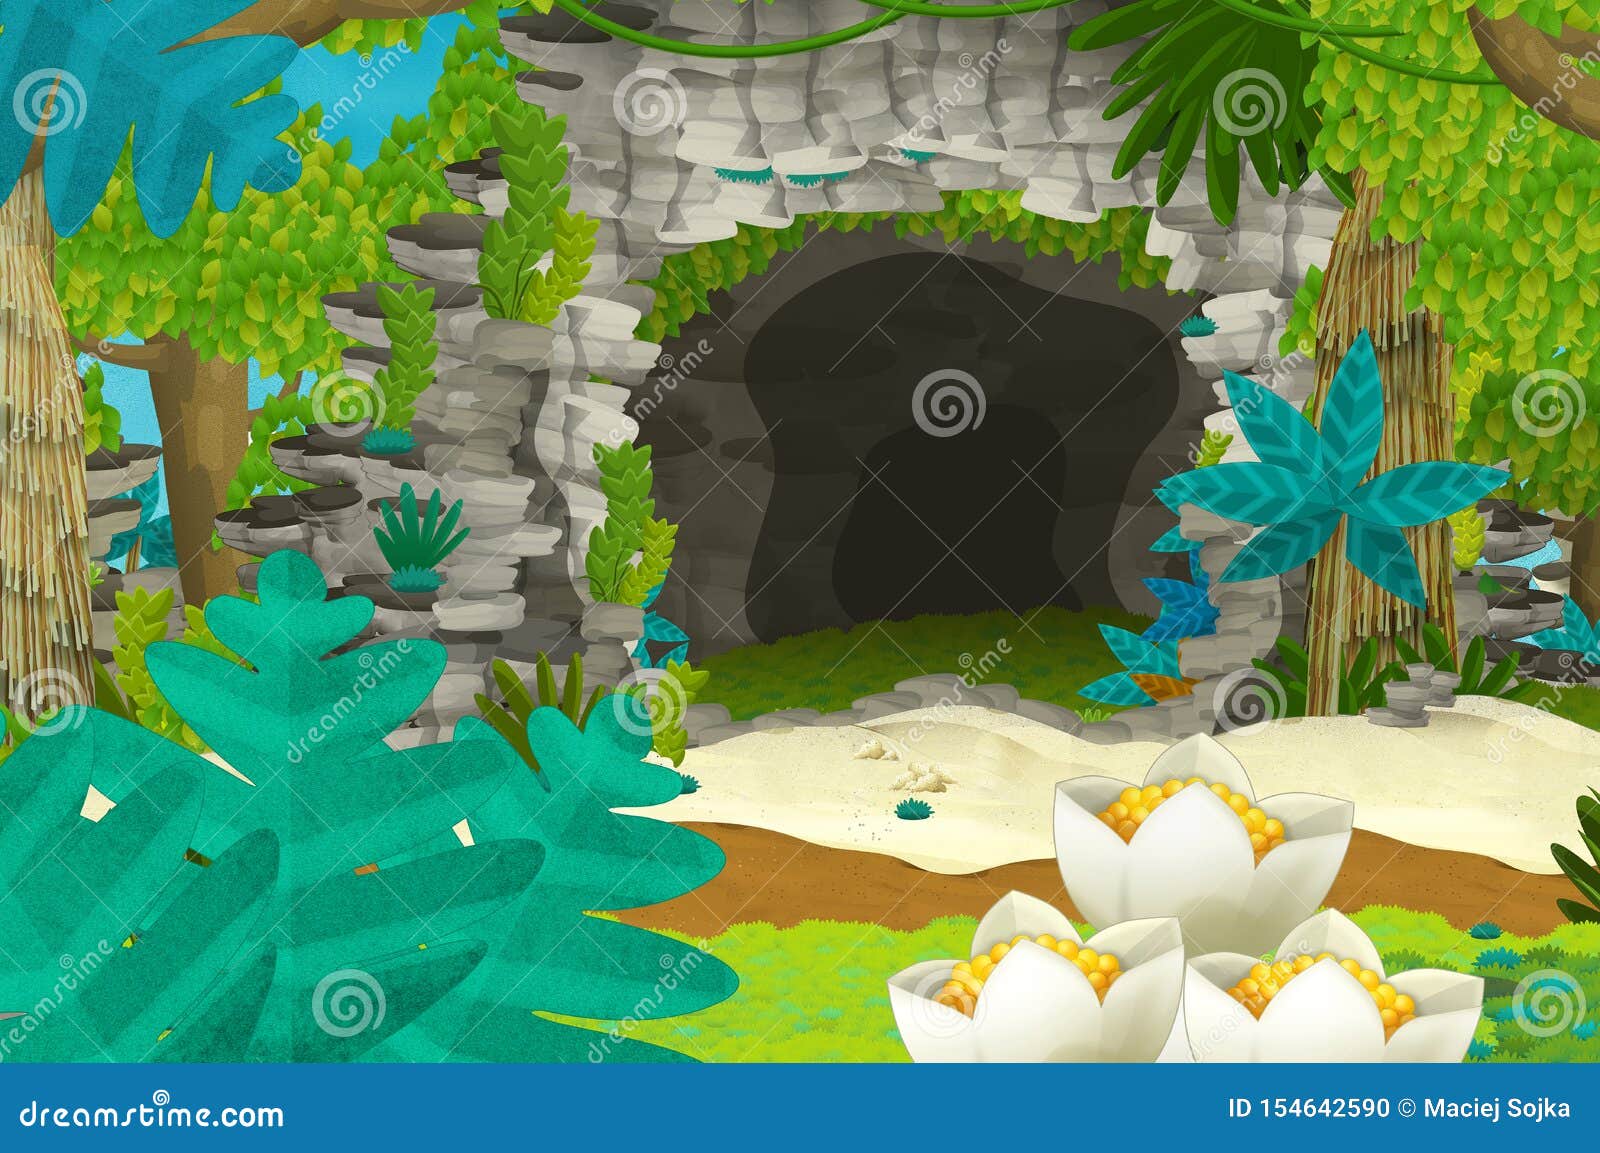 Cartoon Background With Cave In The Jungle Stock Illustration